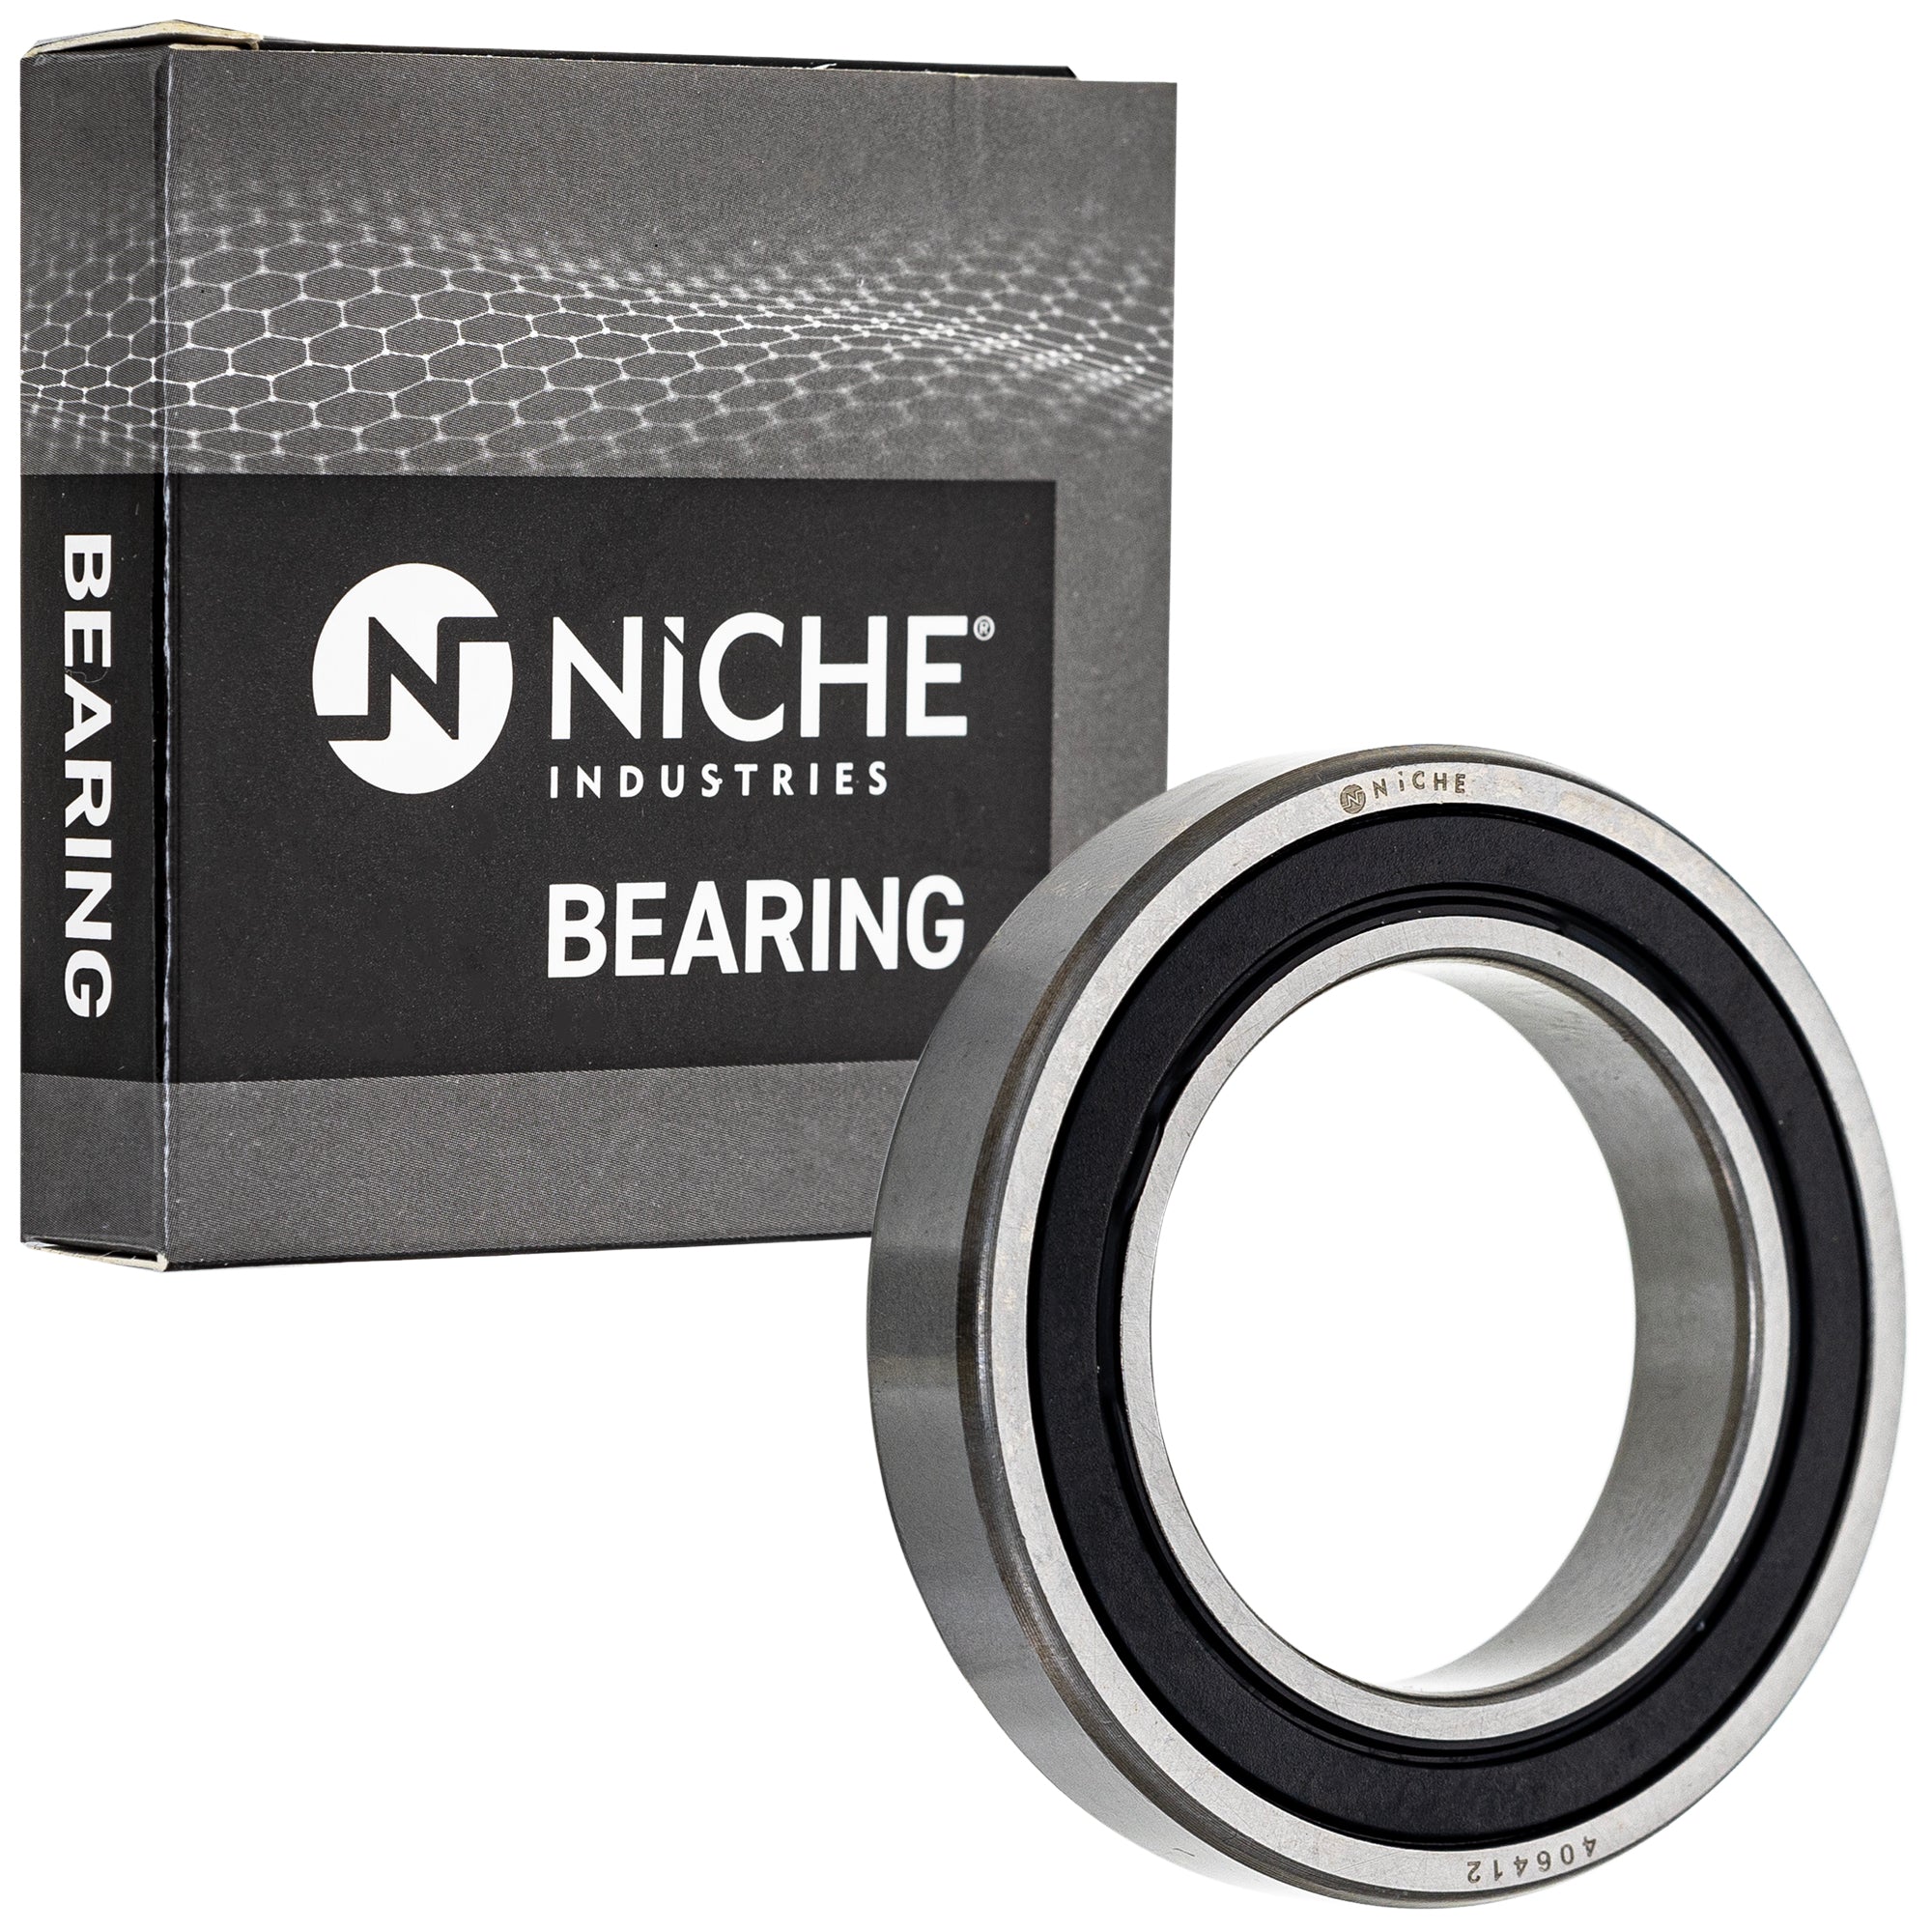 NICHE 519-CBB2262R Bearing 10-Pack for zOTHER YFZ450 Raptor